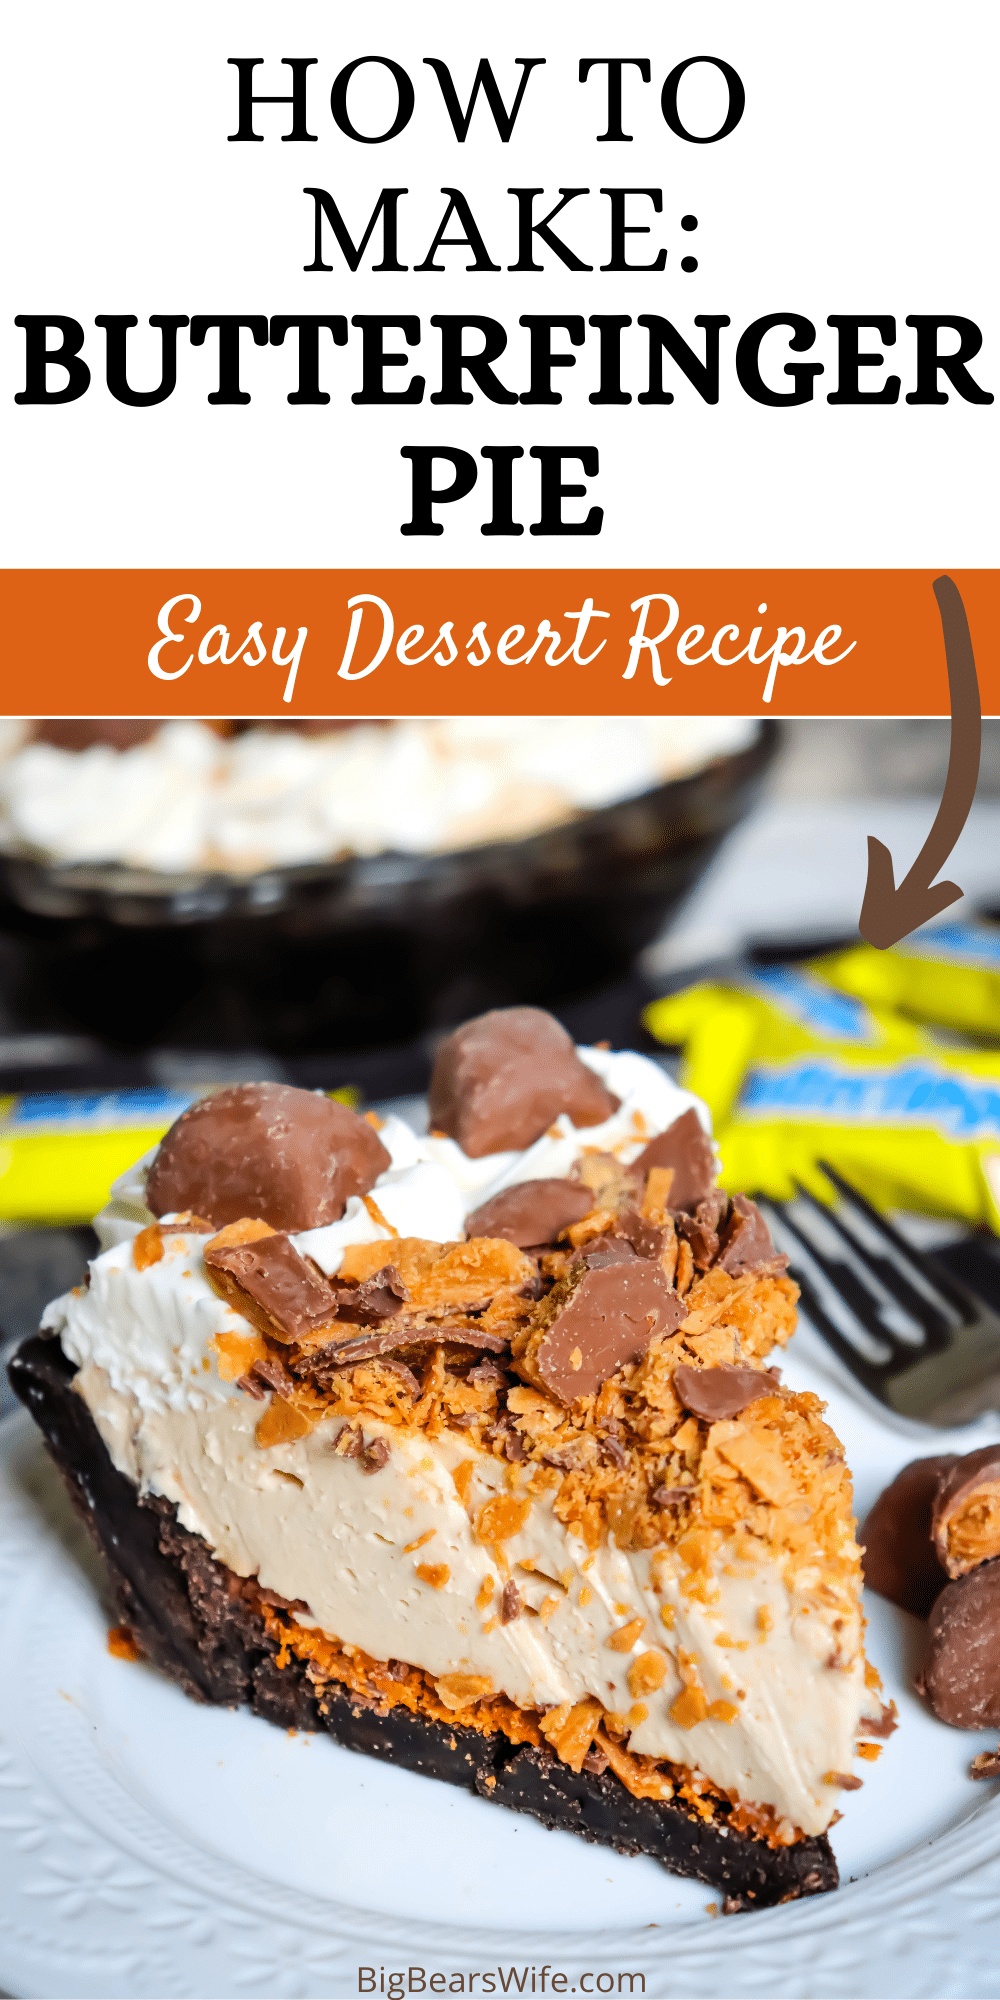 Love Butterfinger® candy bars? This sweet Butterfinger Pie is packed full of Butterfinger candies, peanut butter and chocolate. An easy, no bake pie for the chocolate lover in your life that likes a bit of crunch.  via @bigbearswife